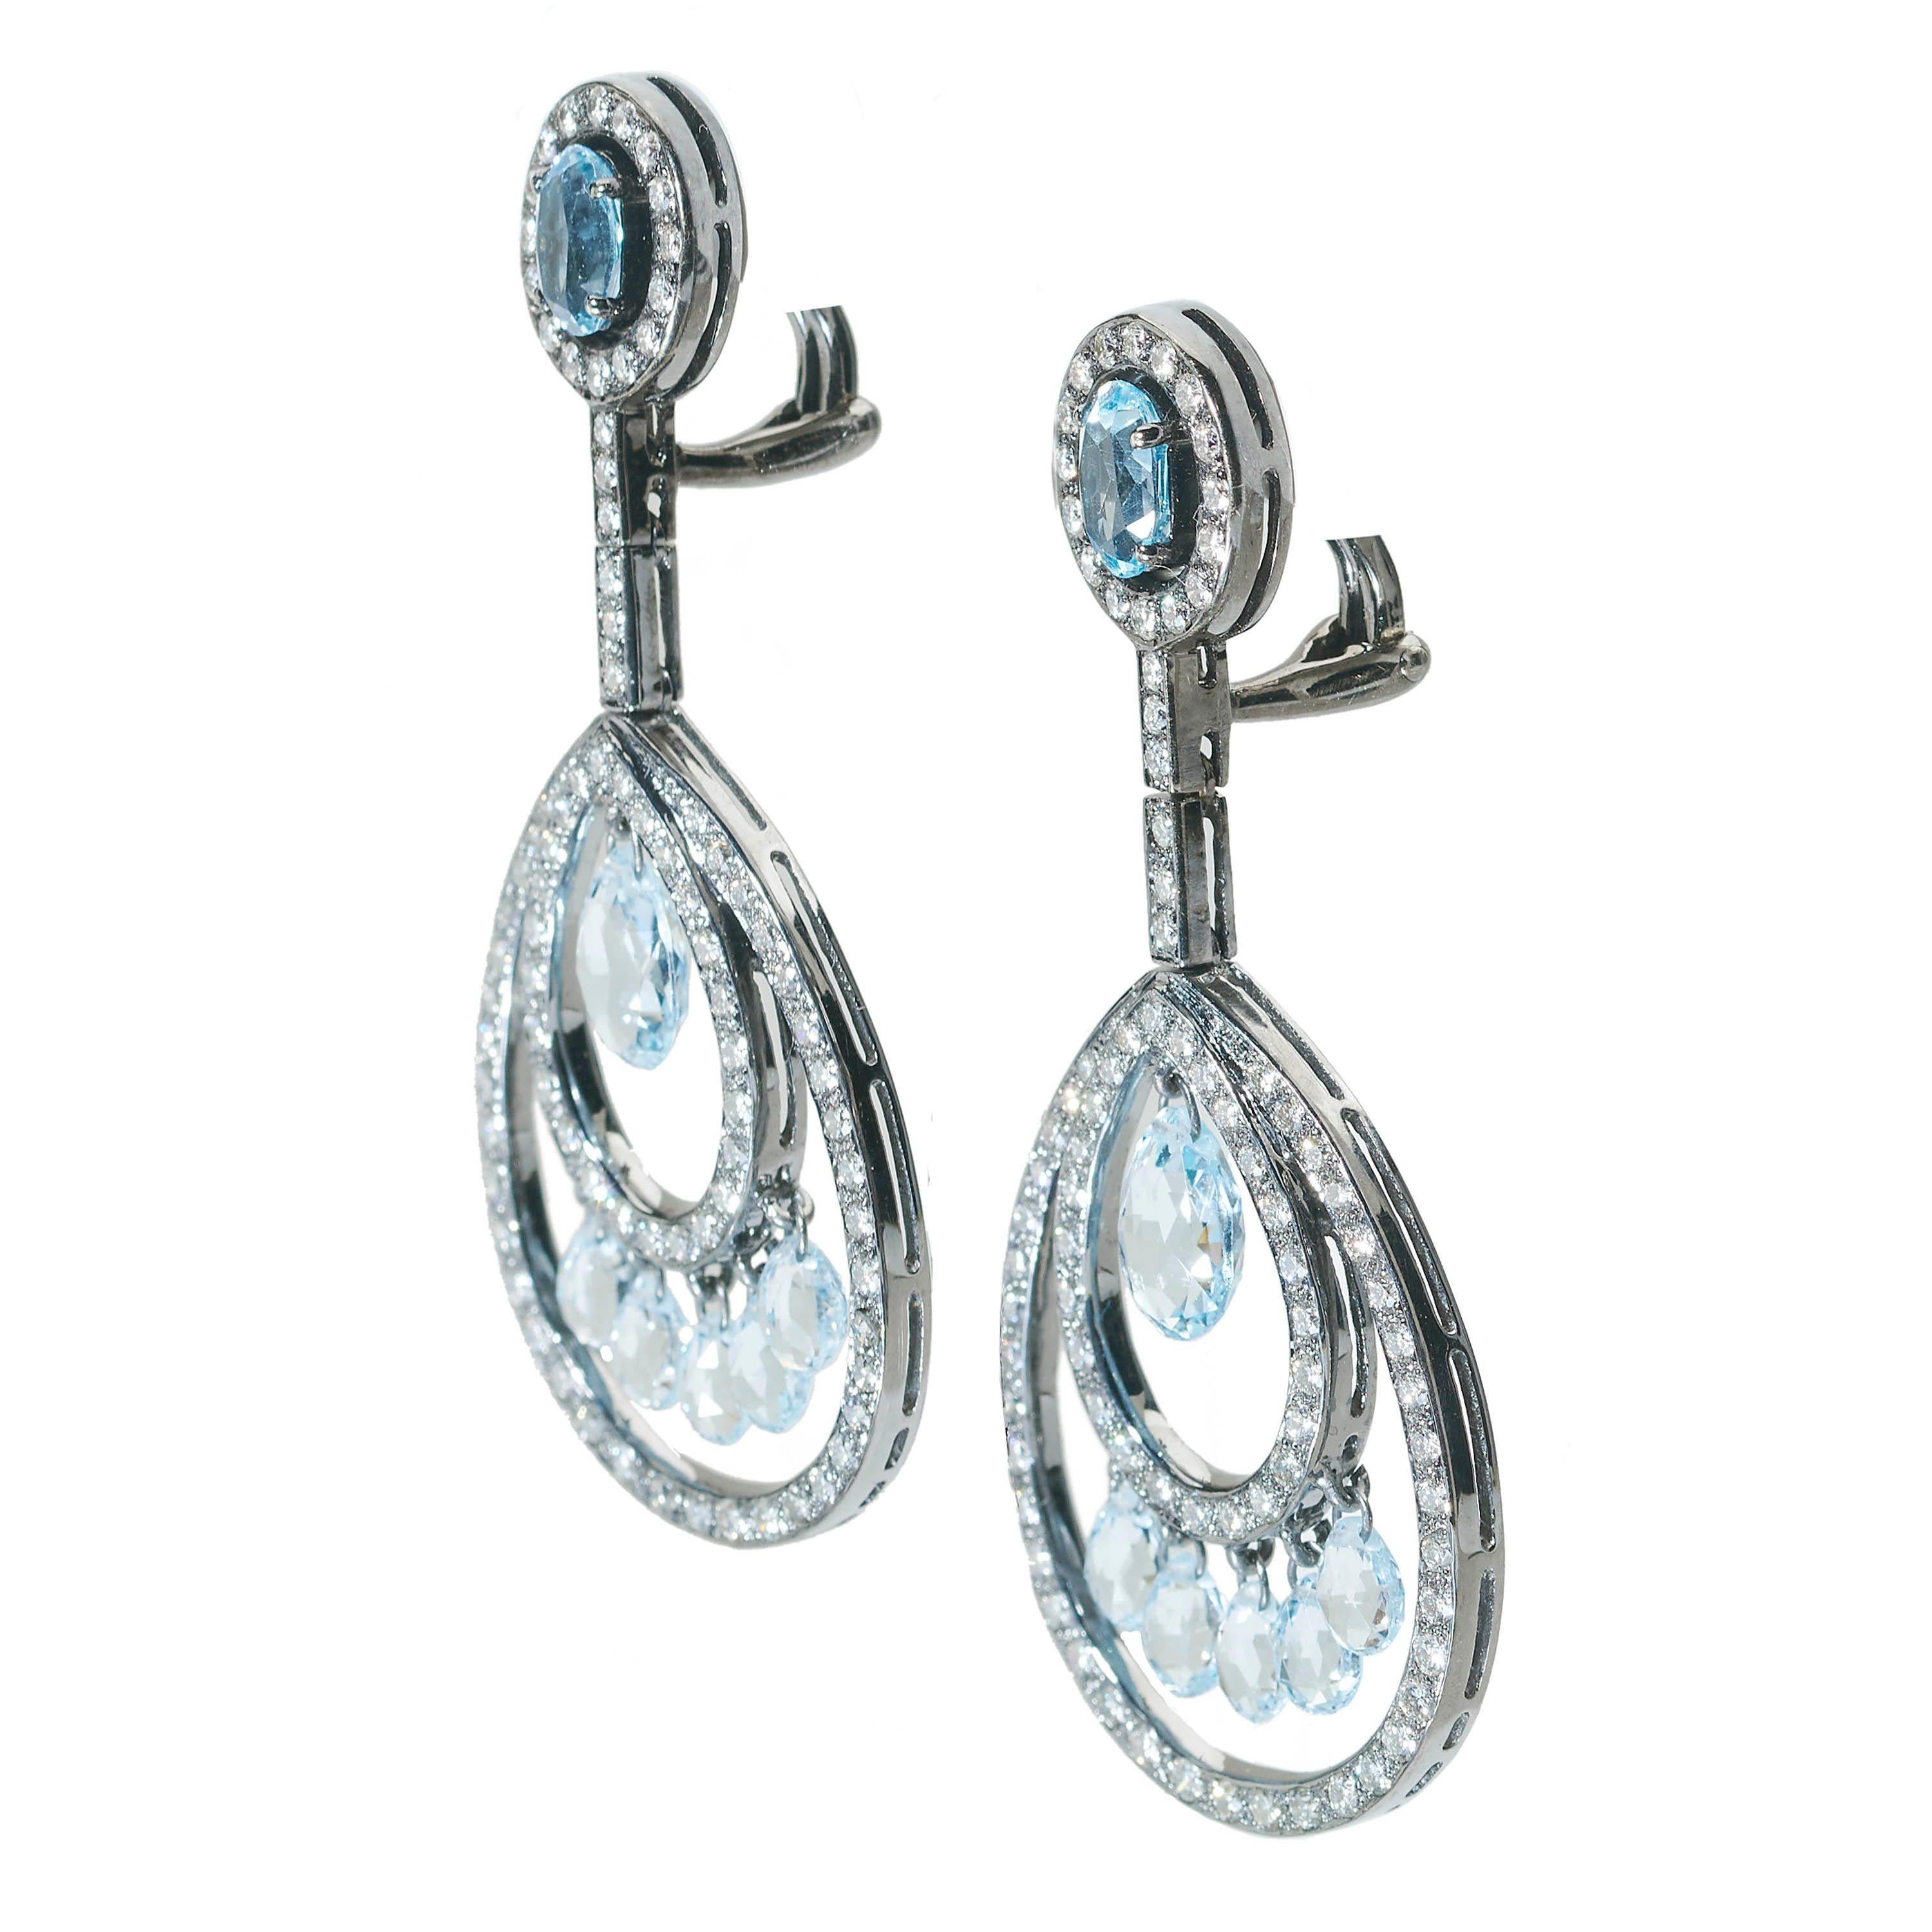 A pair of blue topaz and diamond drop earrings, comprising tops set with an oval faceted pear shape diamond, surrounded by a circle of round brilliant-cut diamonds, with a row of round brilliant-cut diamonds, joining a pendant formed of two open